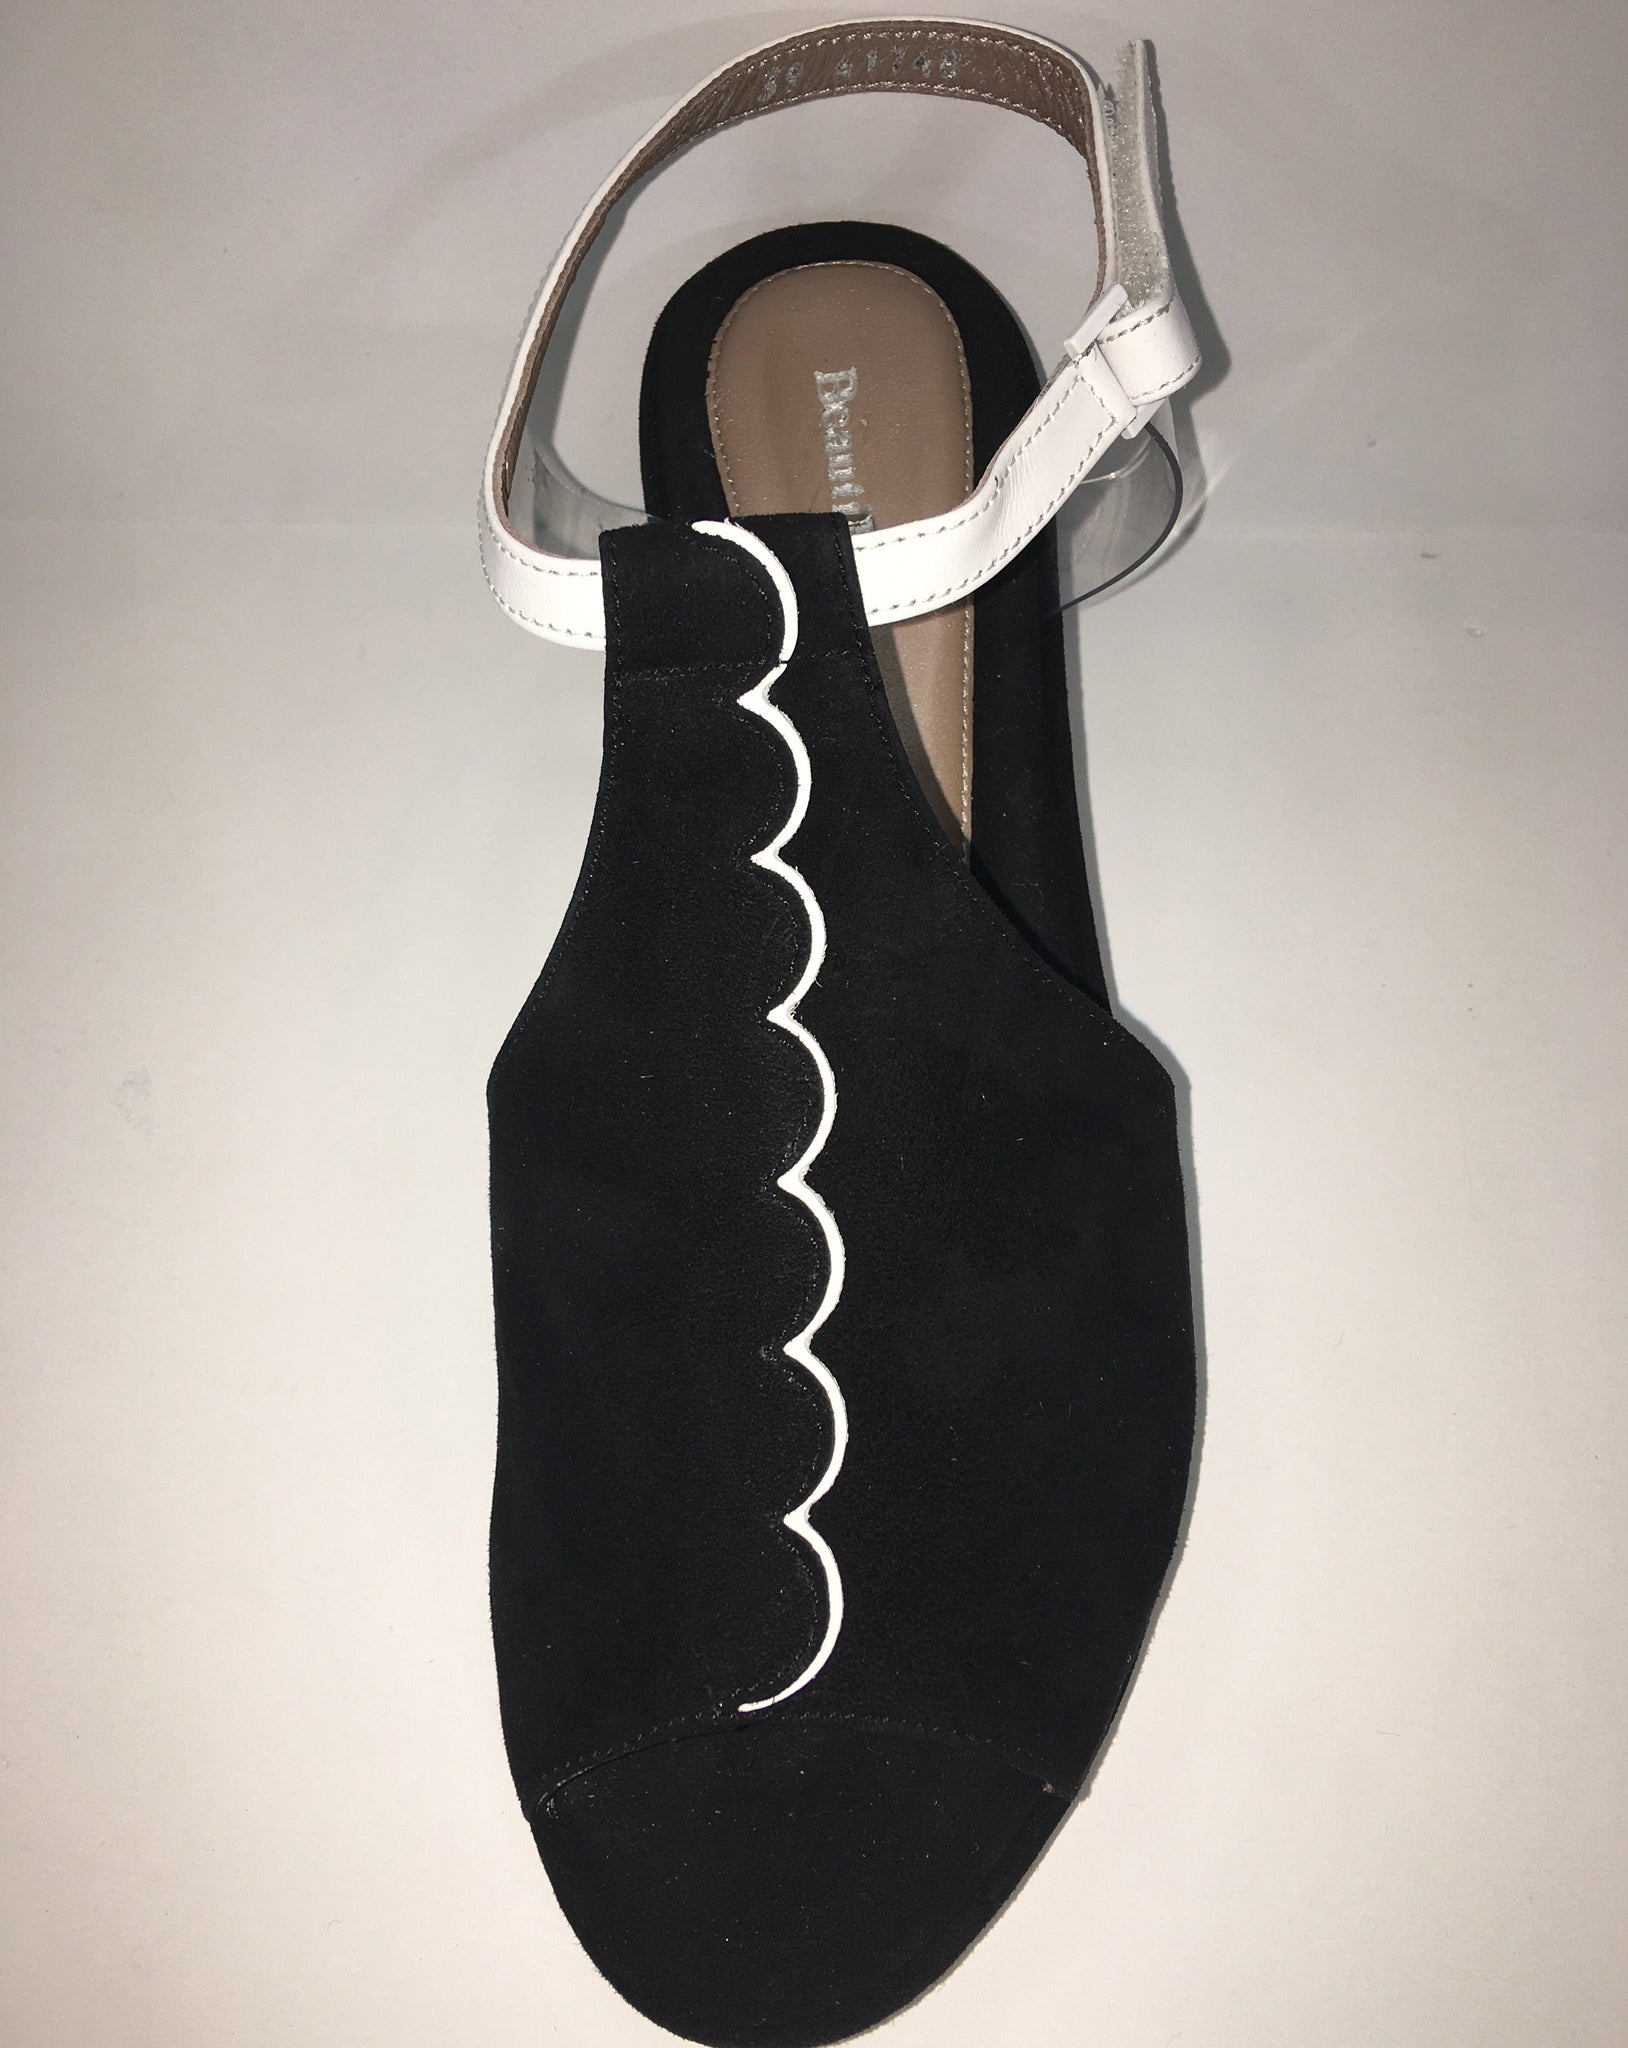 Black and White, Suede Sandal